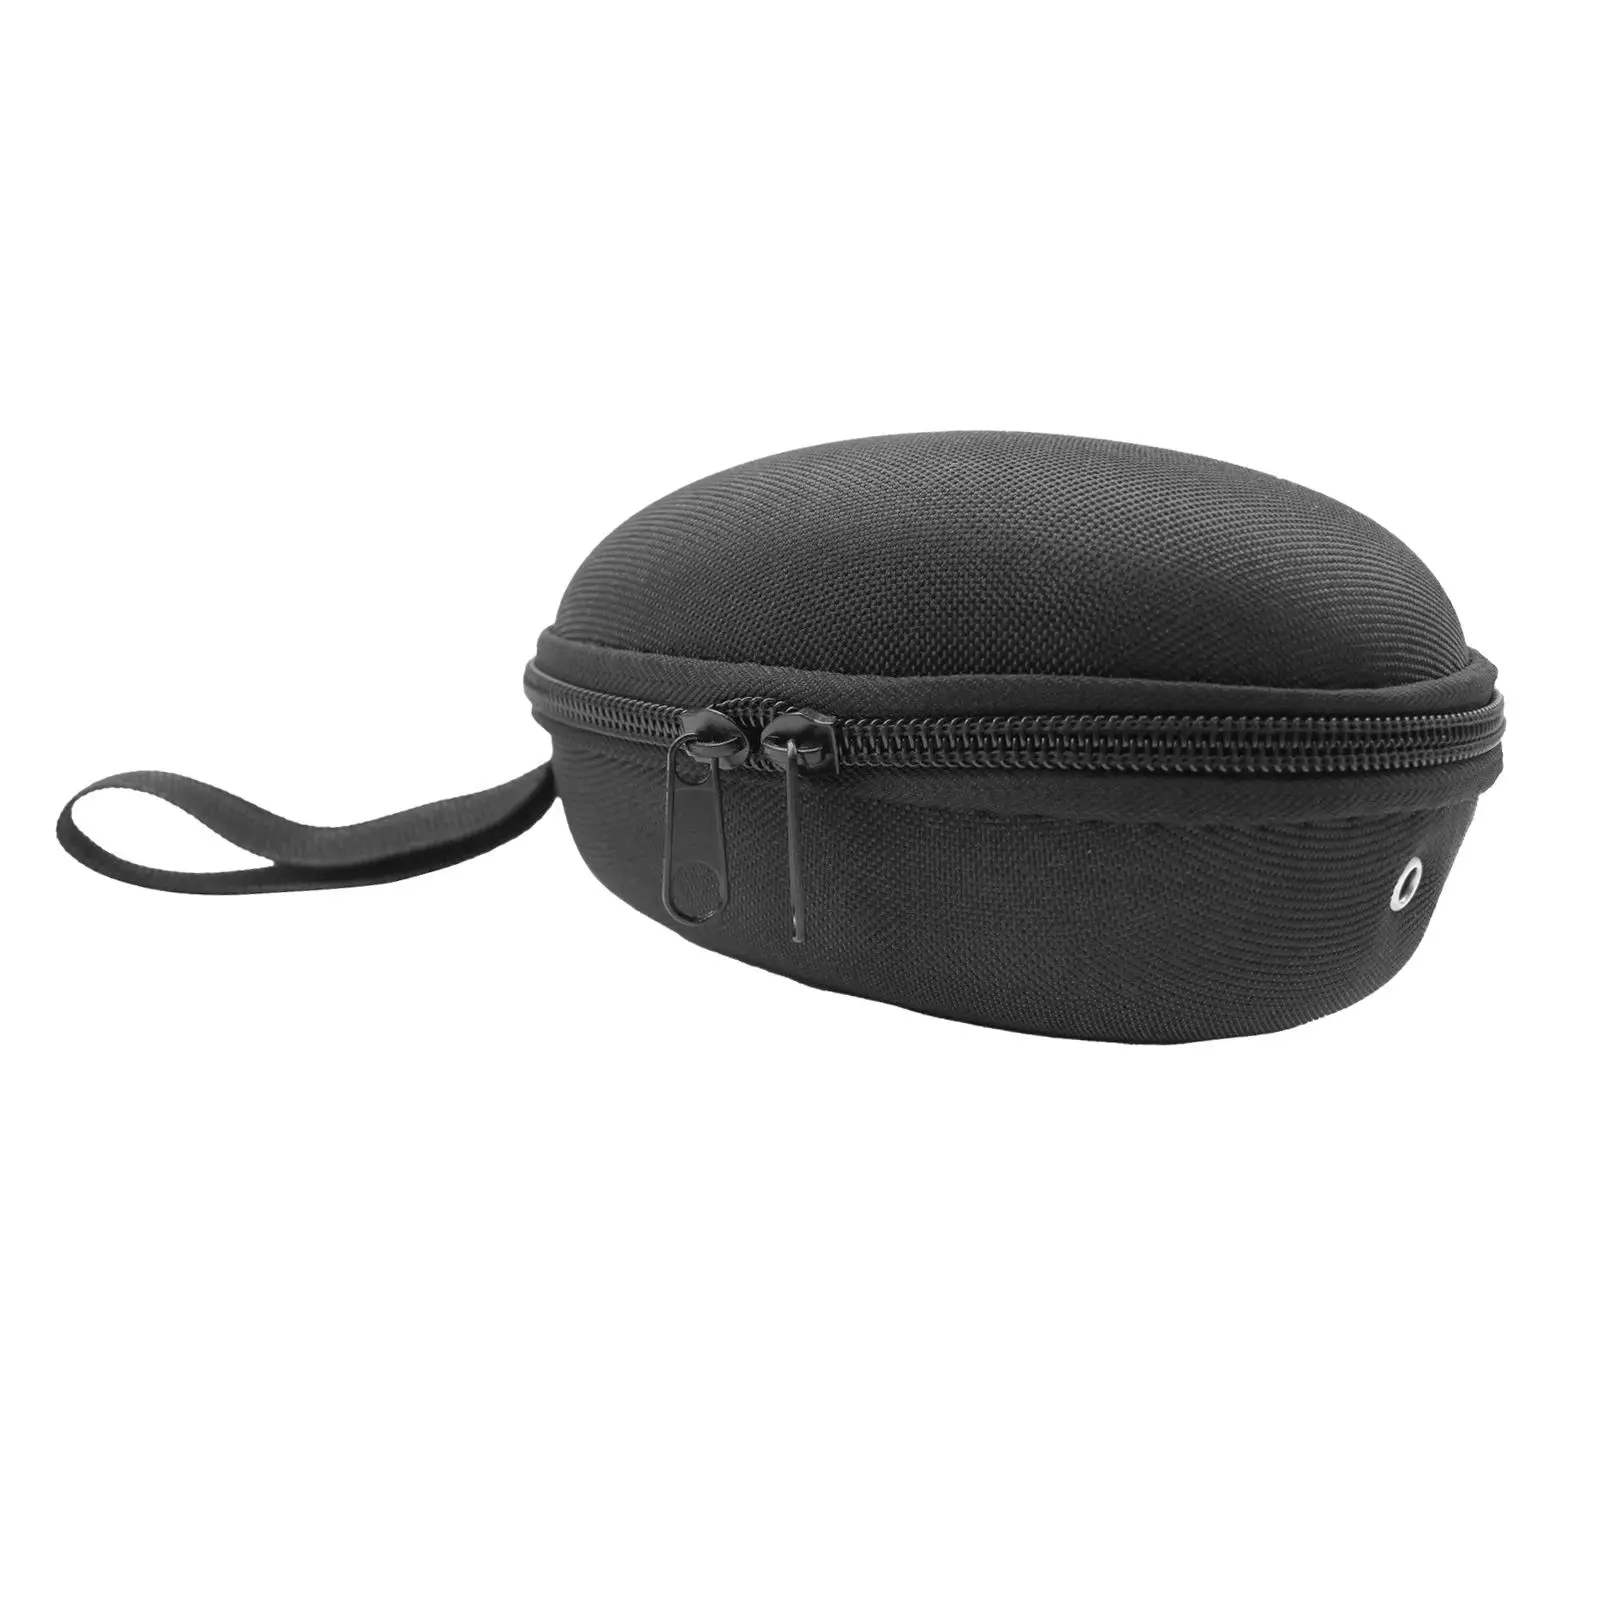 Fishing Reel Bag Fishing Gear Organizer Tackle Box Protective Case Black Storage Bag Pouch for Bait Casting Fishing Tool Drum